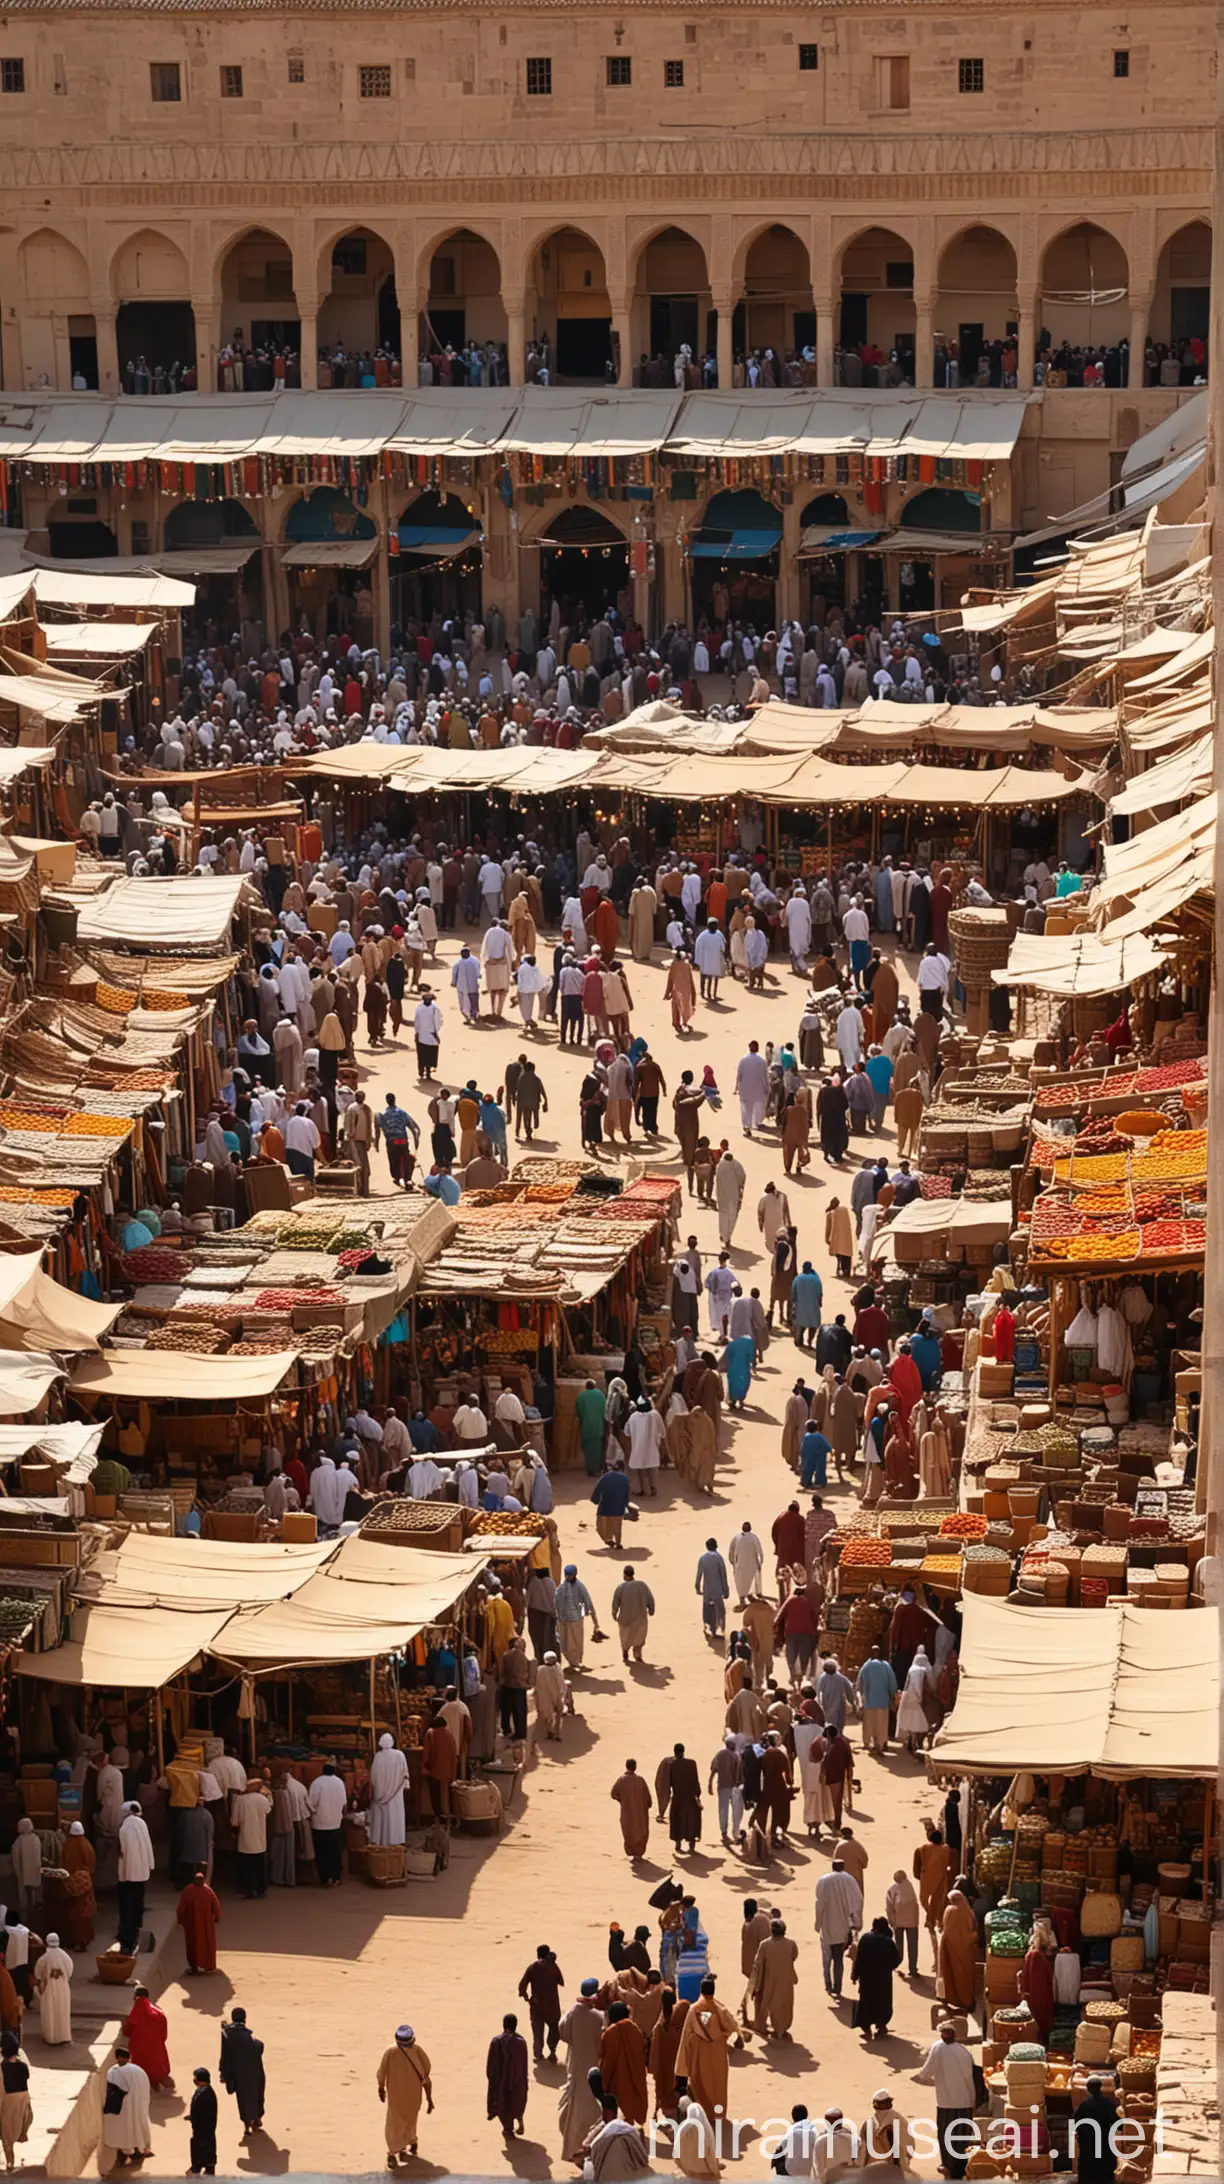 Vibrant Medina Marketplace Crowds Commerce and Tradition